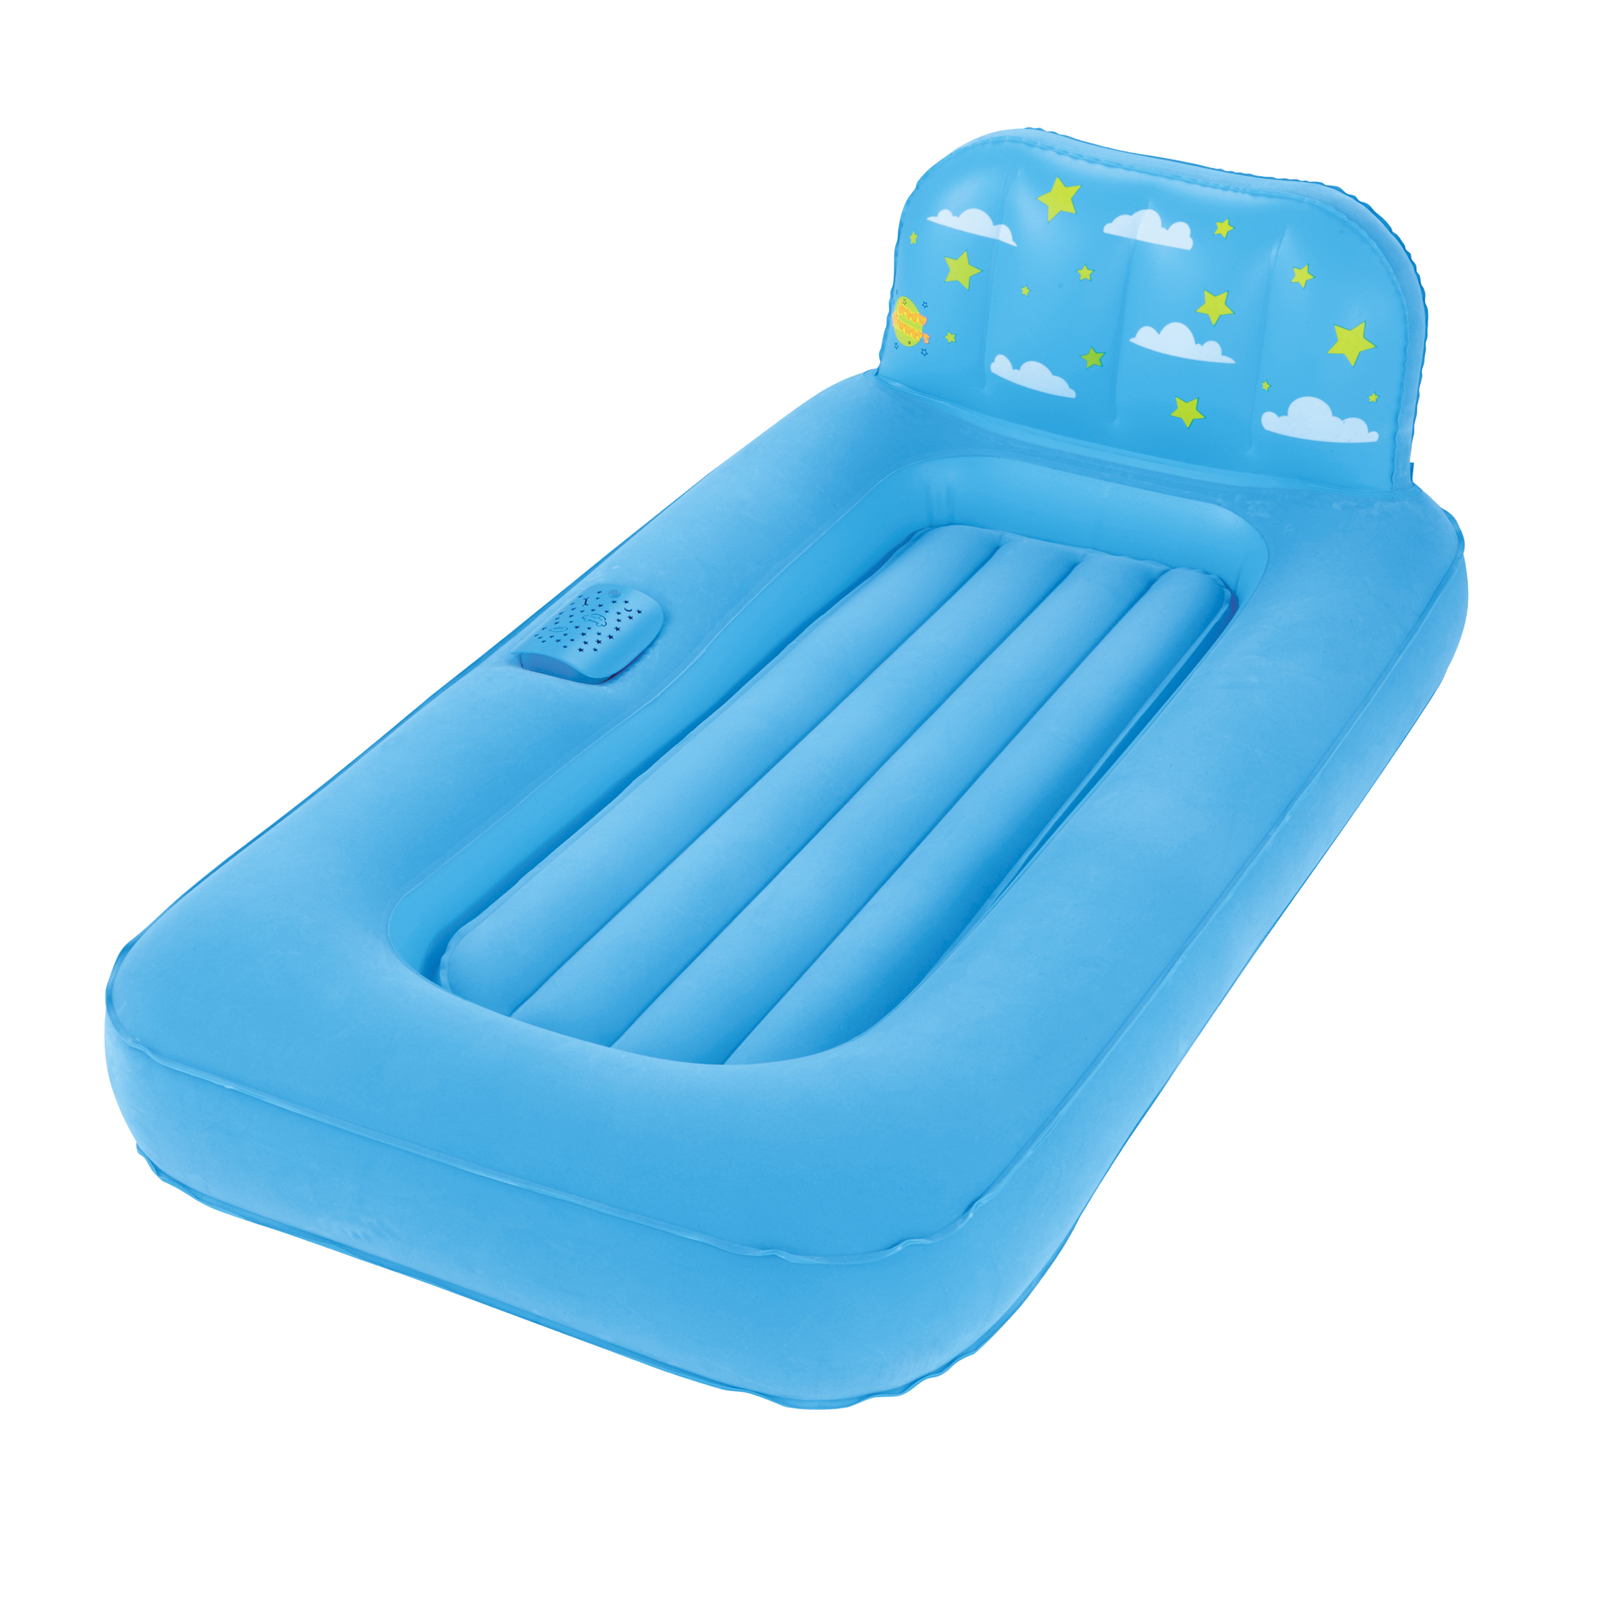 UPC 821808100743 product image for Bestway Dream Glimmers Blue Comfort Airbed | upcitemdb.com